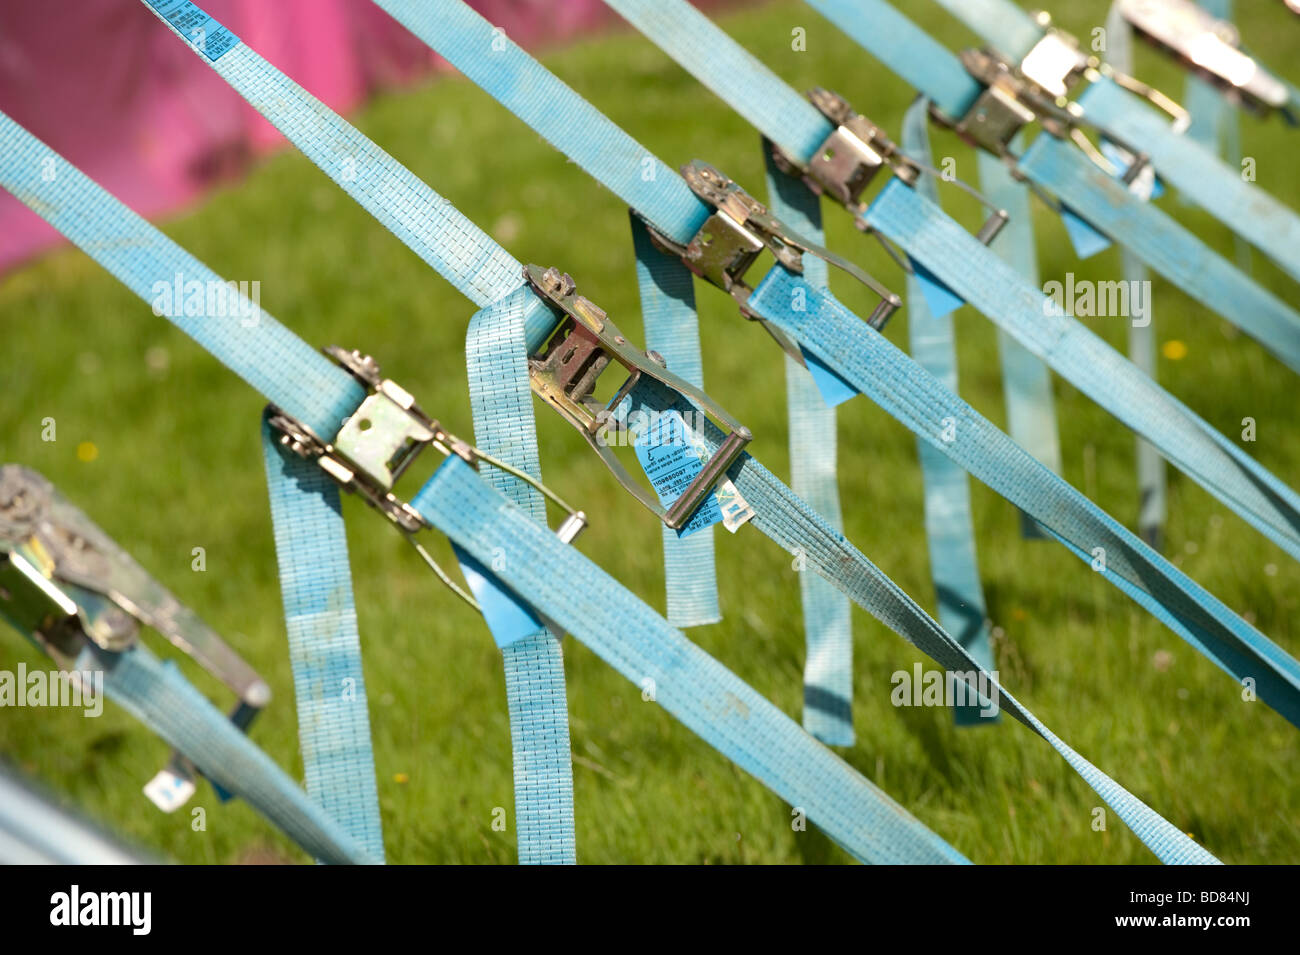 Row of tension tightening straps and pulleys on a large marquee Stock Photo